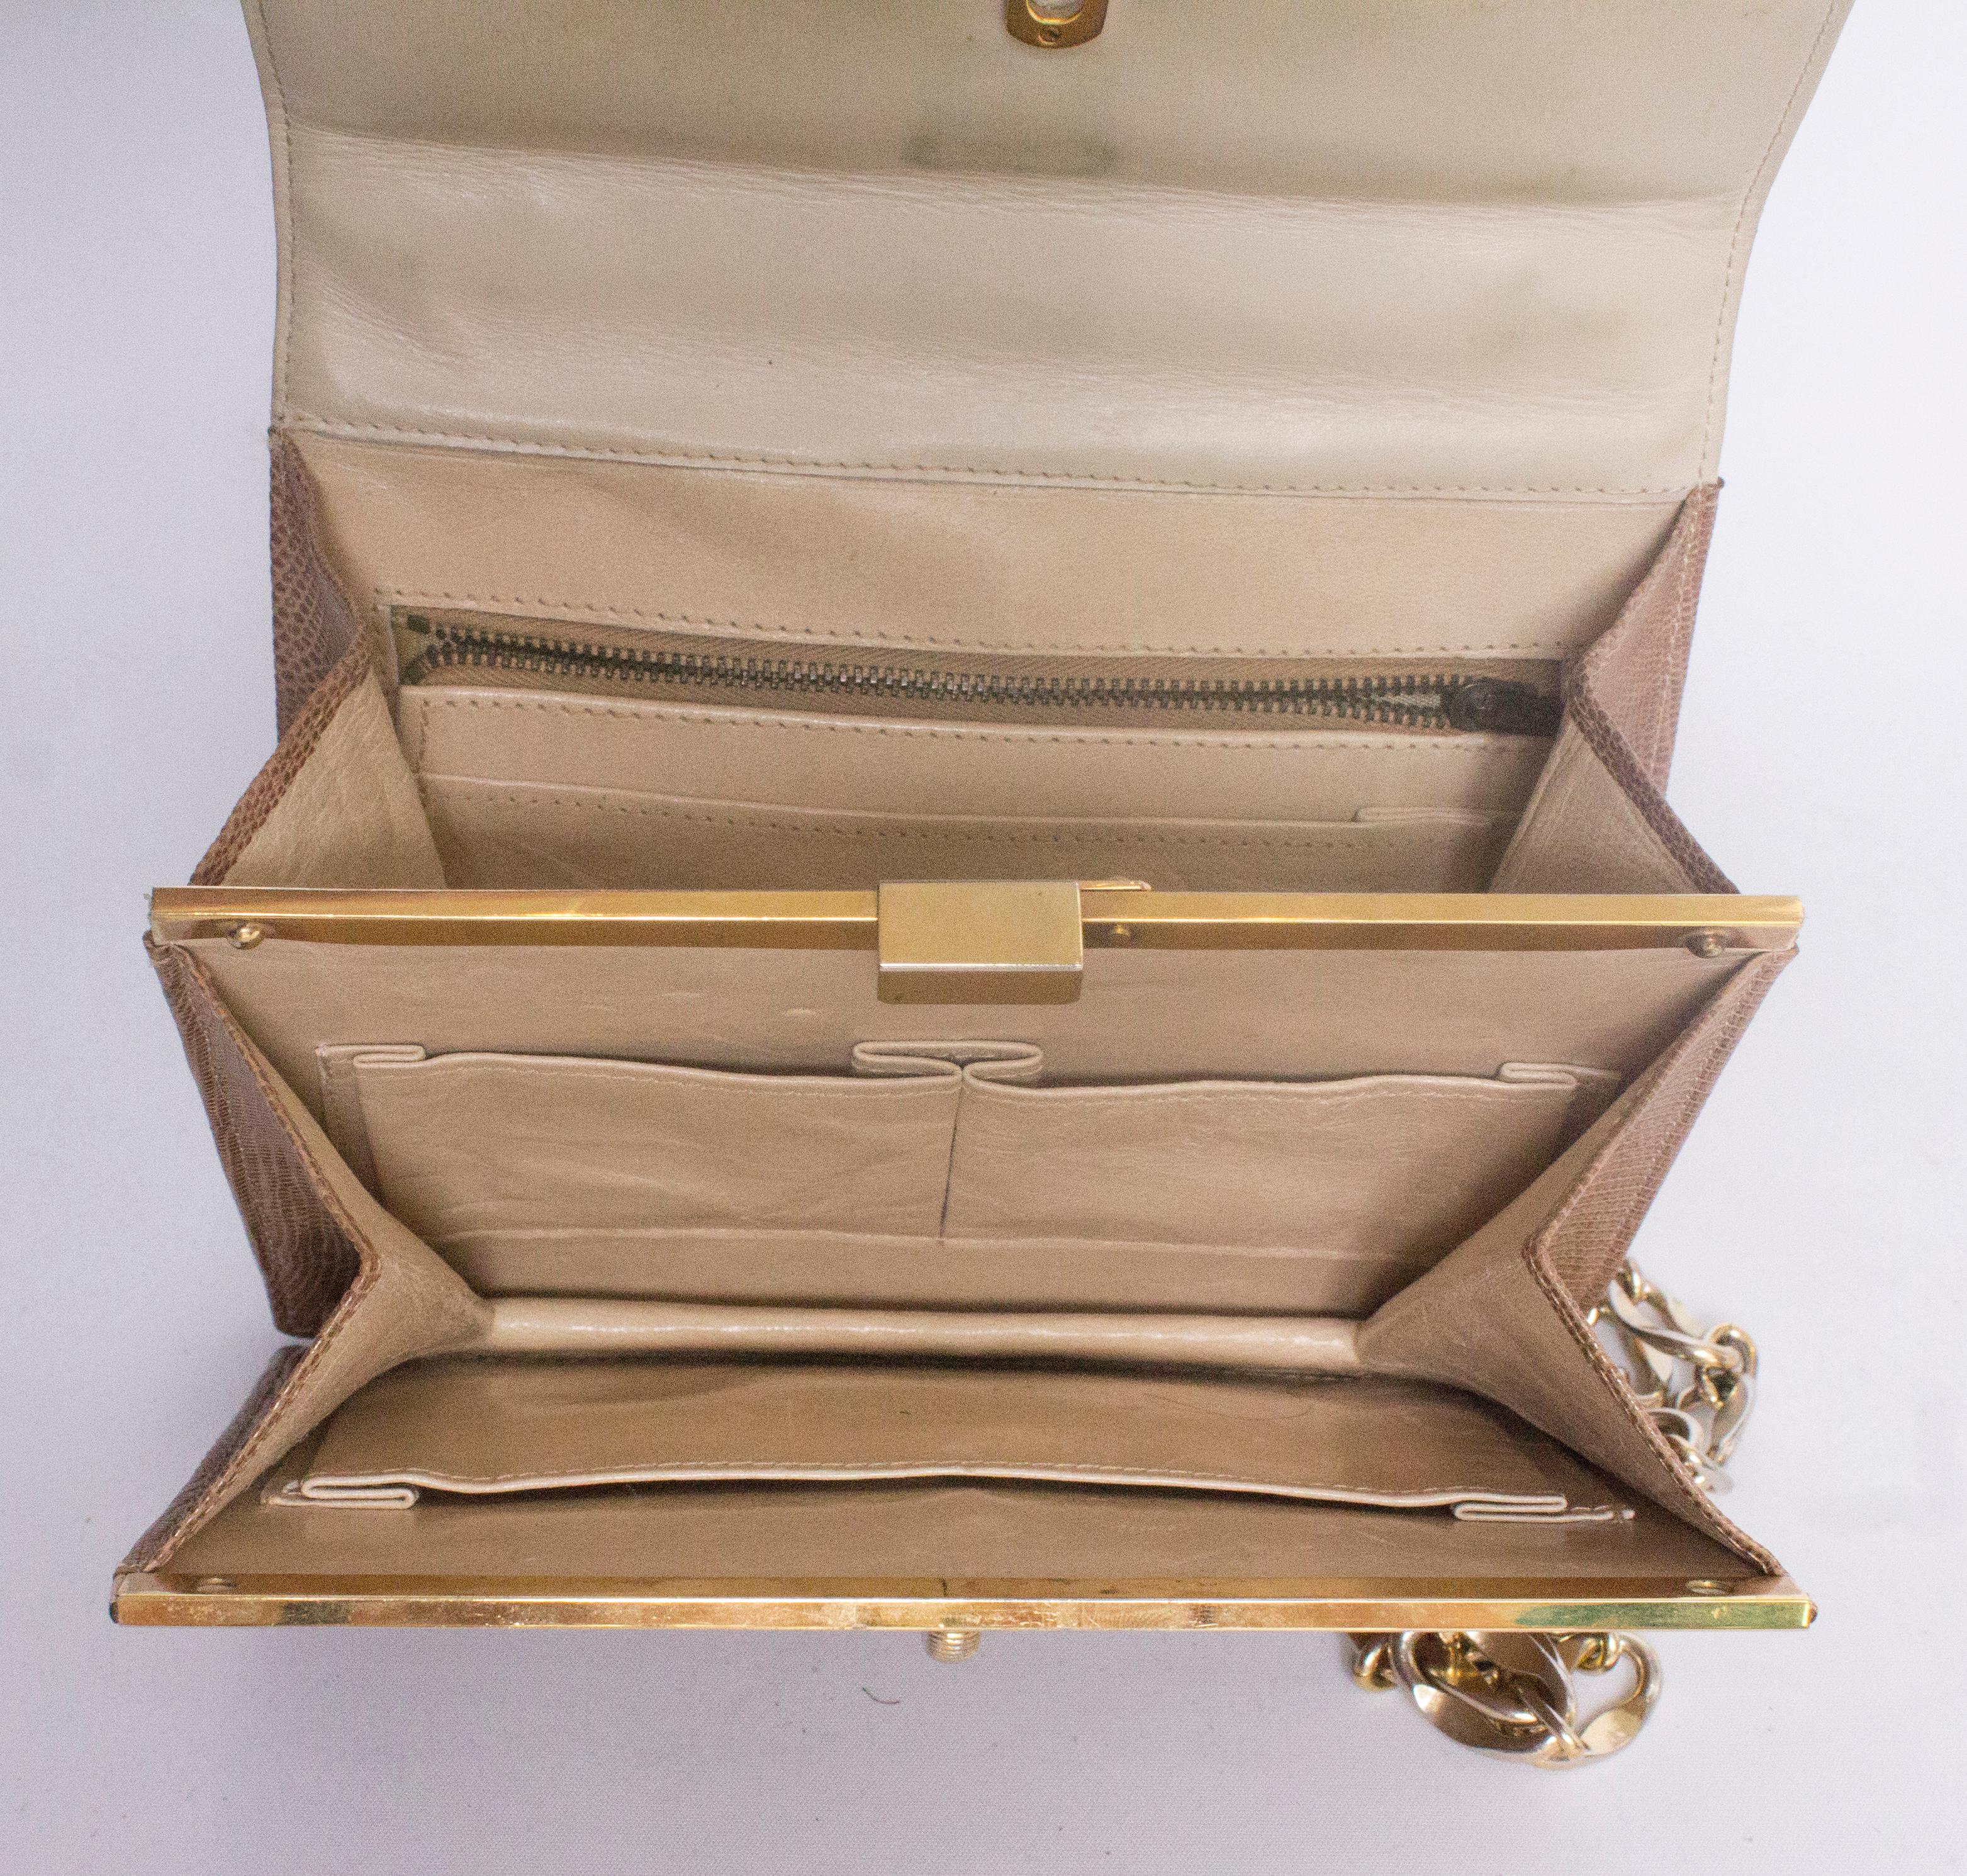 A Vintage 1970s Lizzard Handbag with a Gold Chain 1